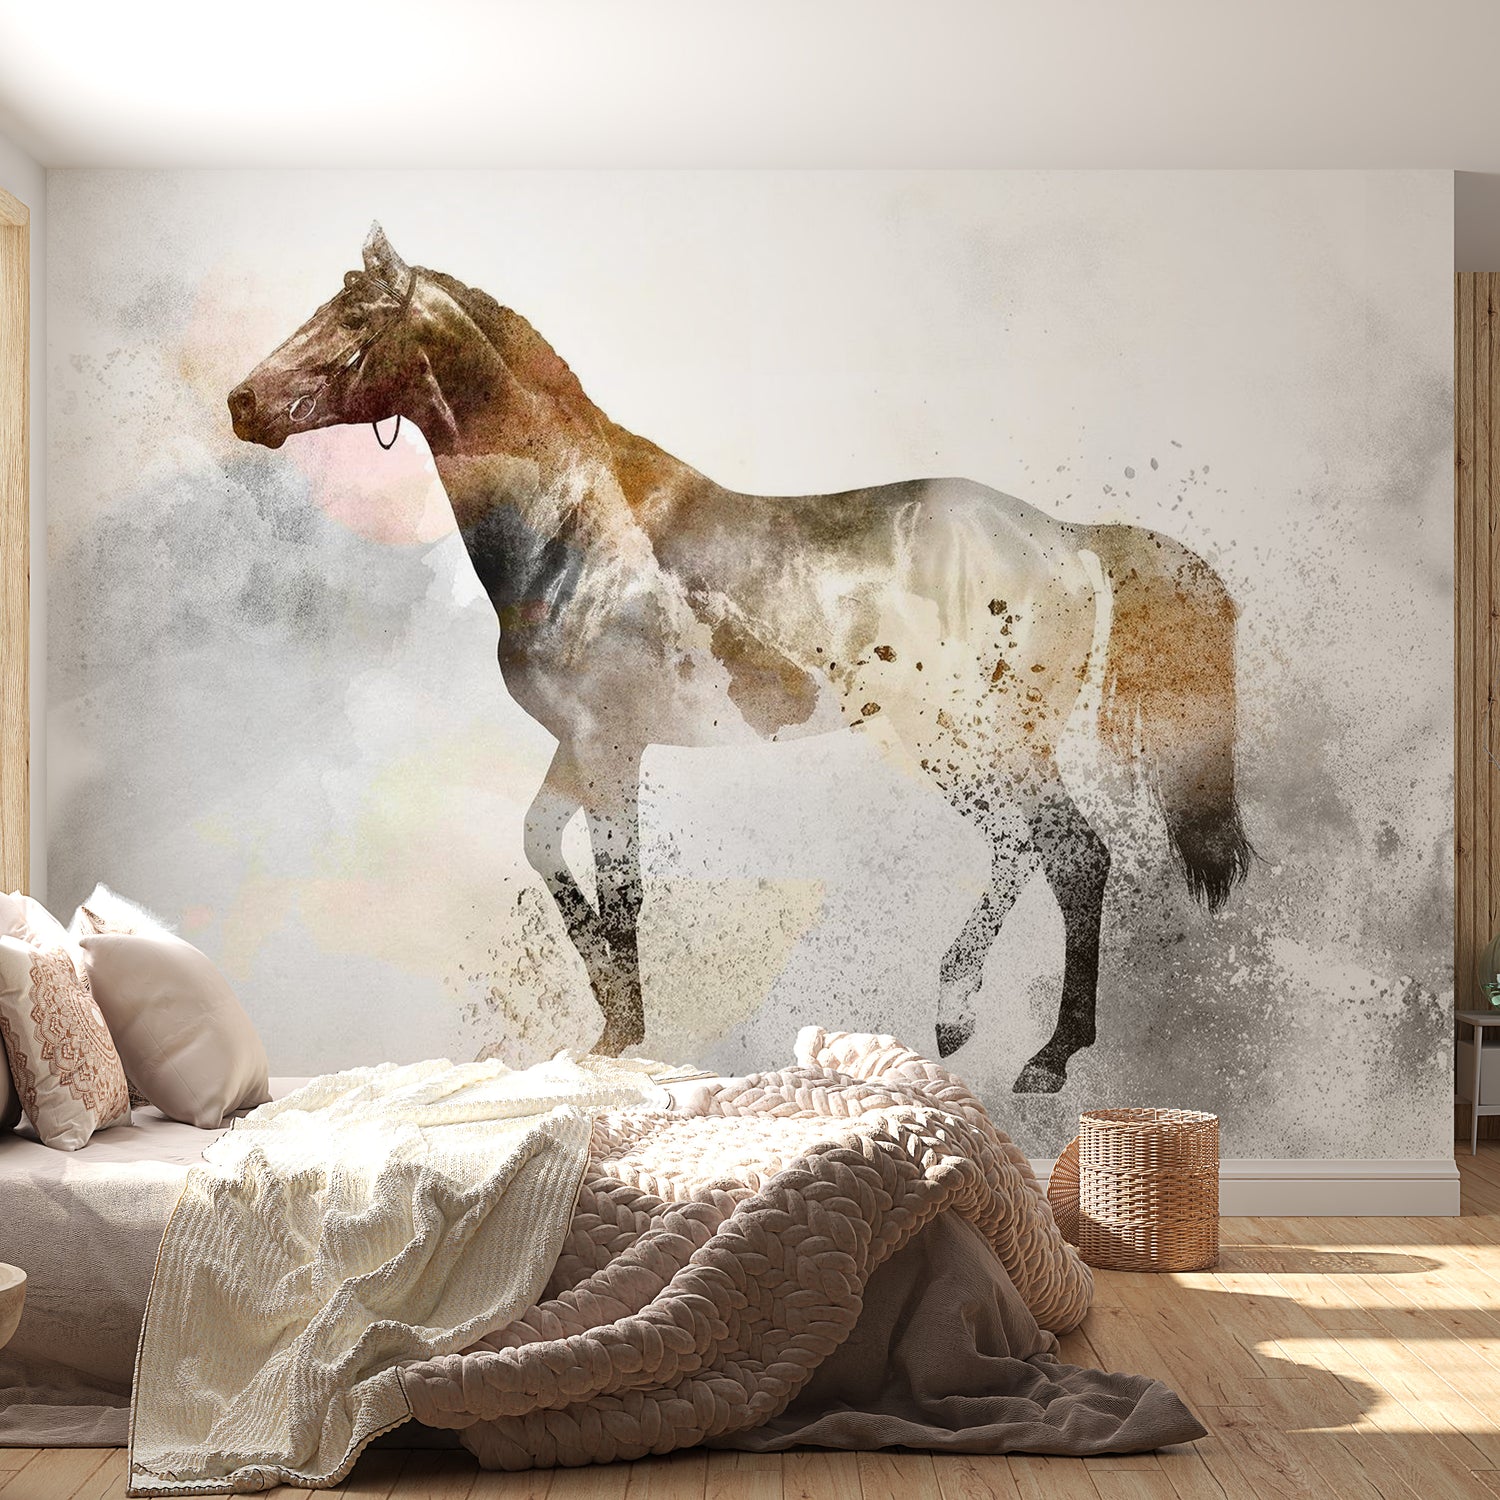 Peel & Stick Animal Wall Mural - Horse In Mist - Removable Wall Decals